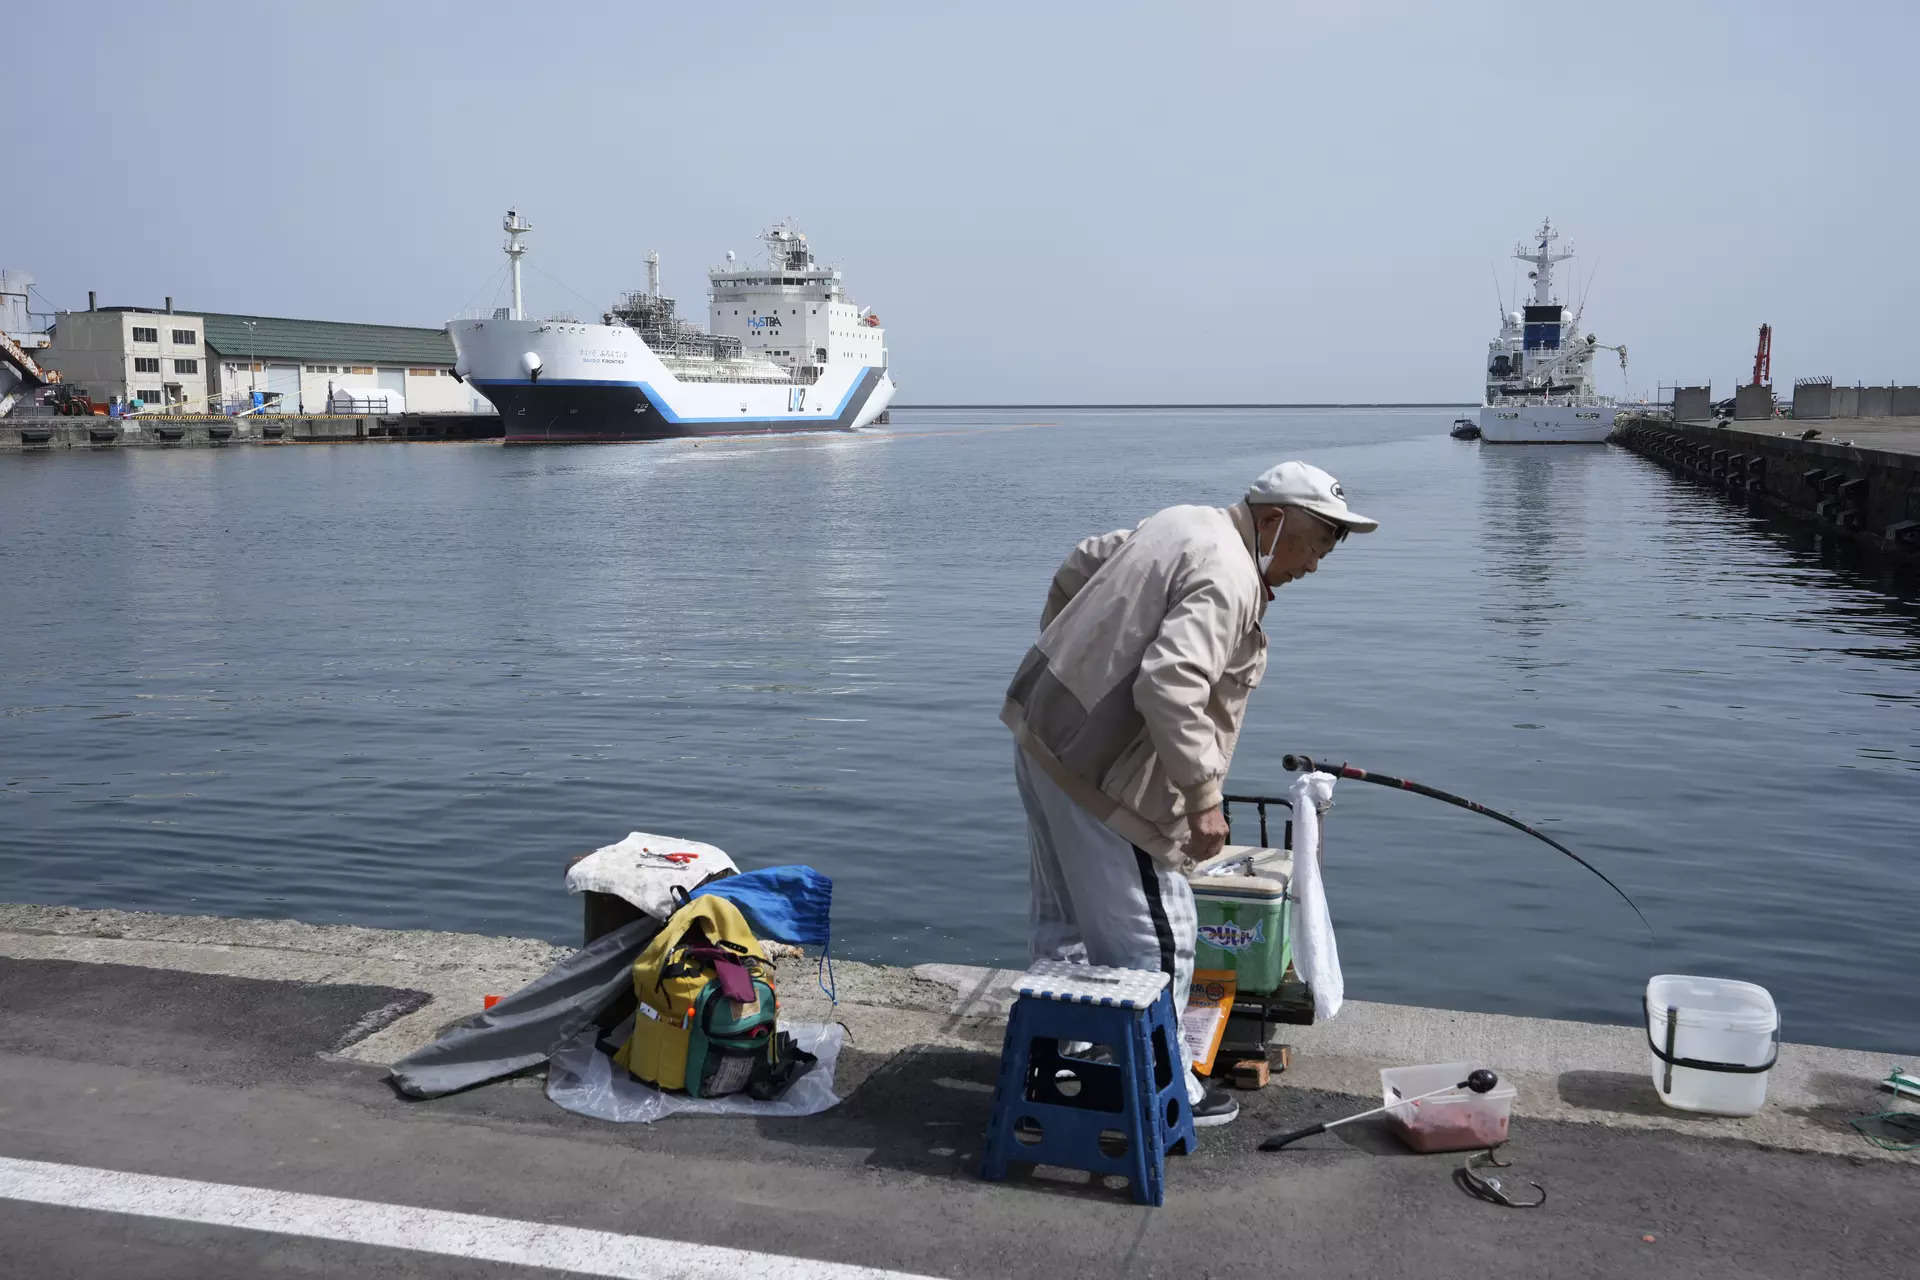 <p>A man tries to catch fish at a pier where a liquefied hydrogen carrier is docked in Otaru, northern Japan, Friday, April 14, 2023. U.S. Energy Secretary Jennifer Granholm took a tour Friday on the Suiso Frontier, a liquefied hydrogen carrier, the day before the G-7 ministers' meeting on climate, energy and environment. (AP Photo/Hiro Komae)</p>